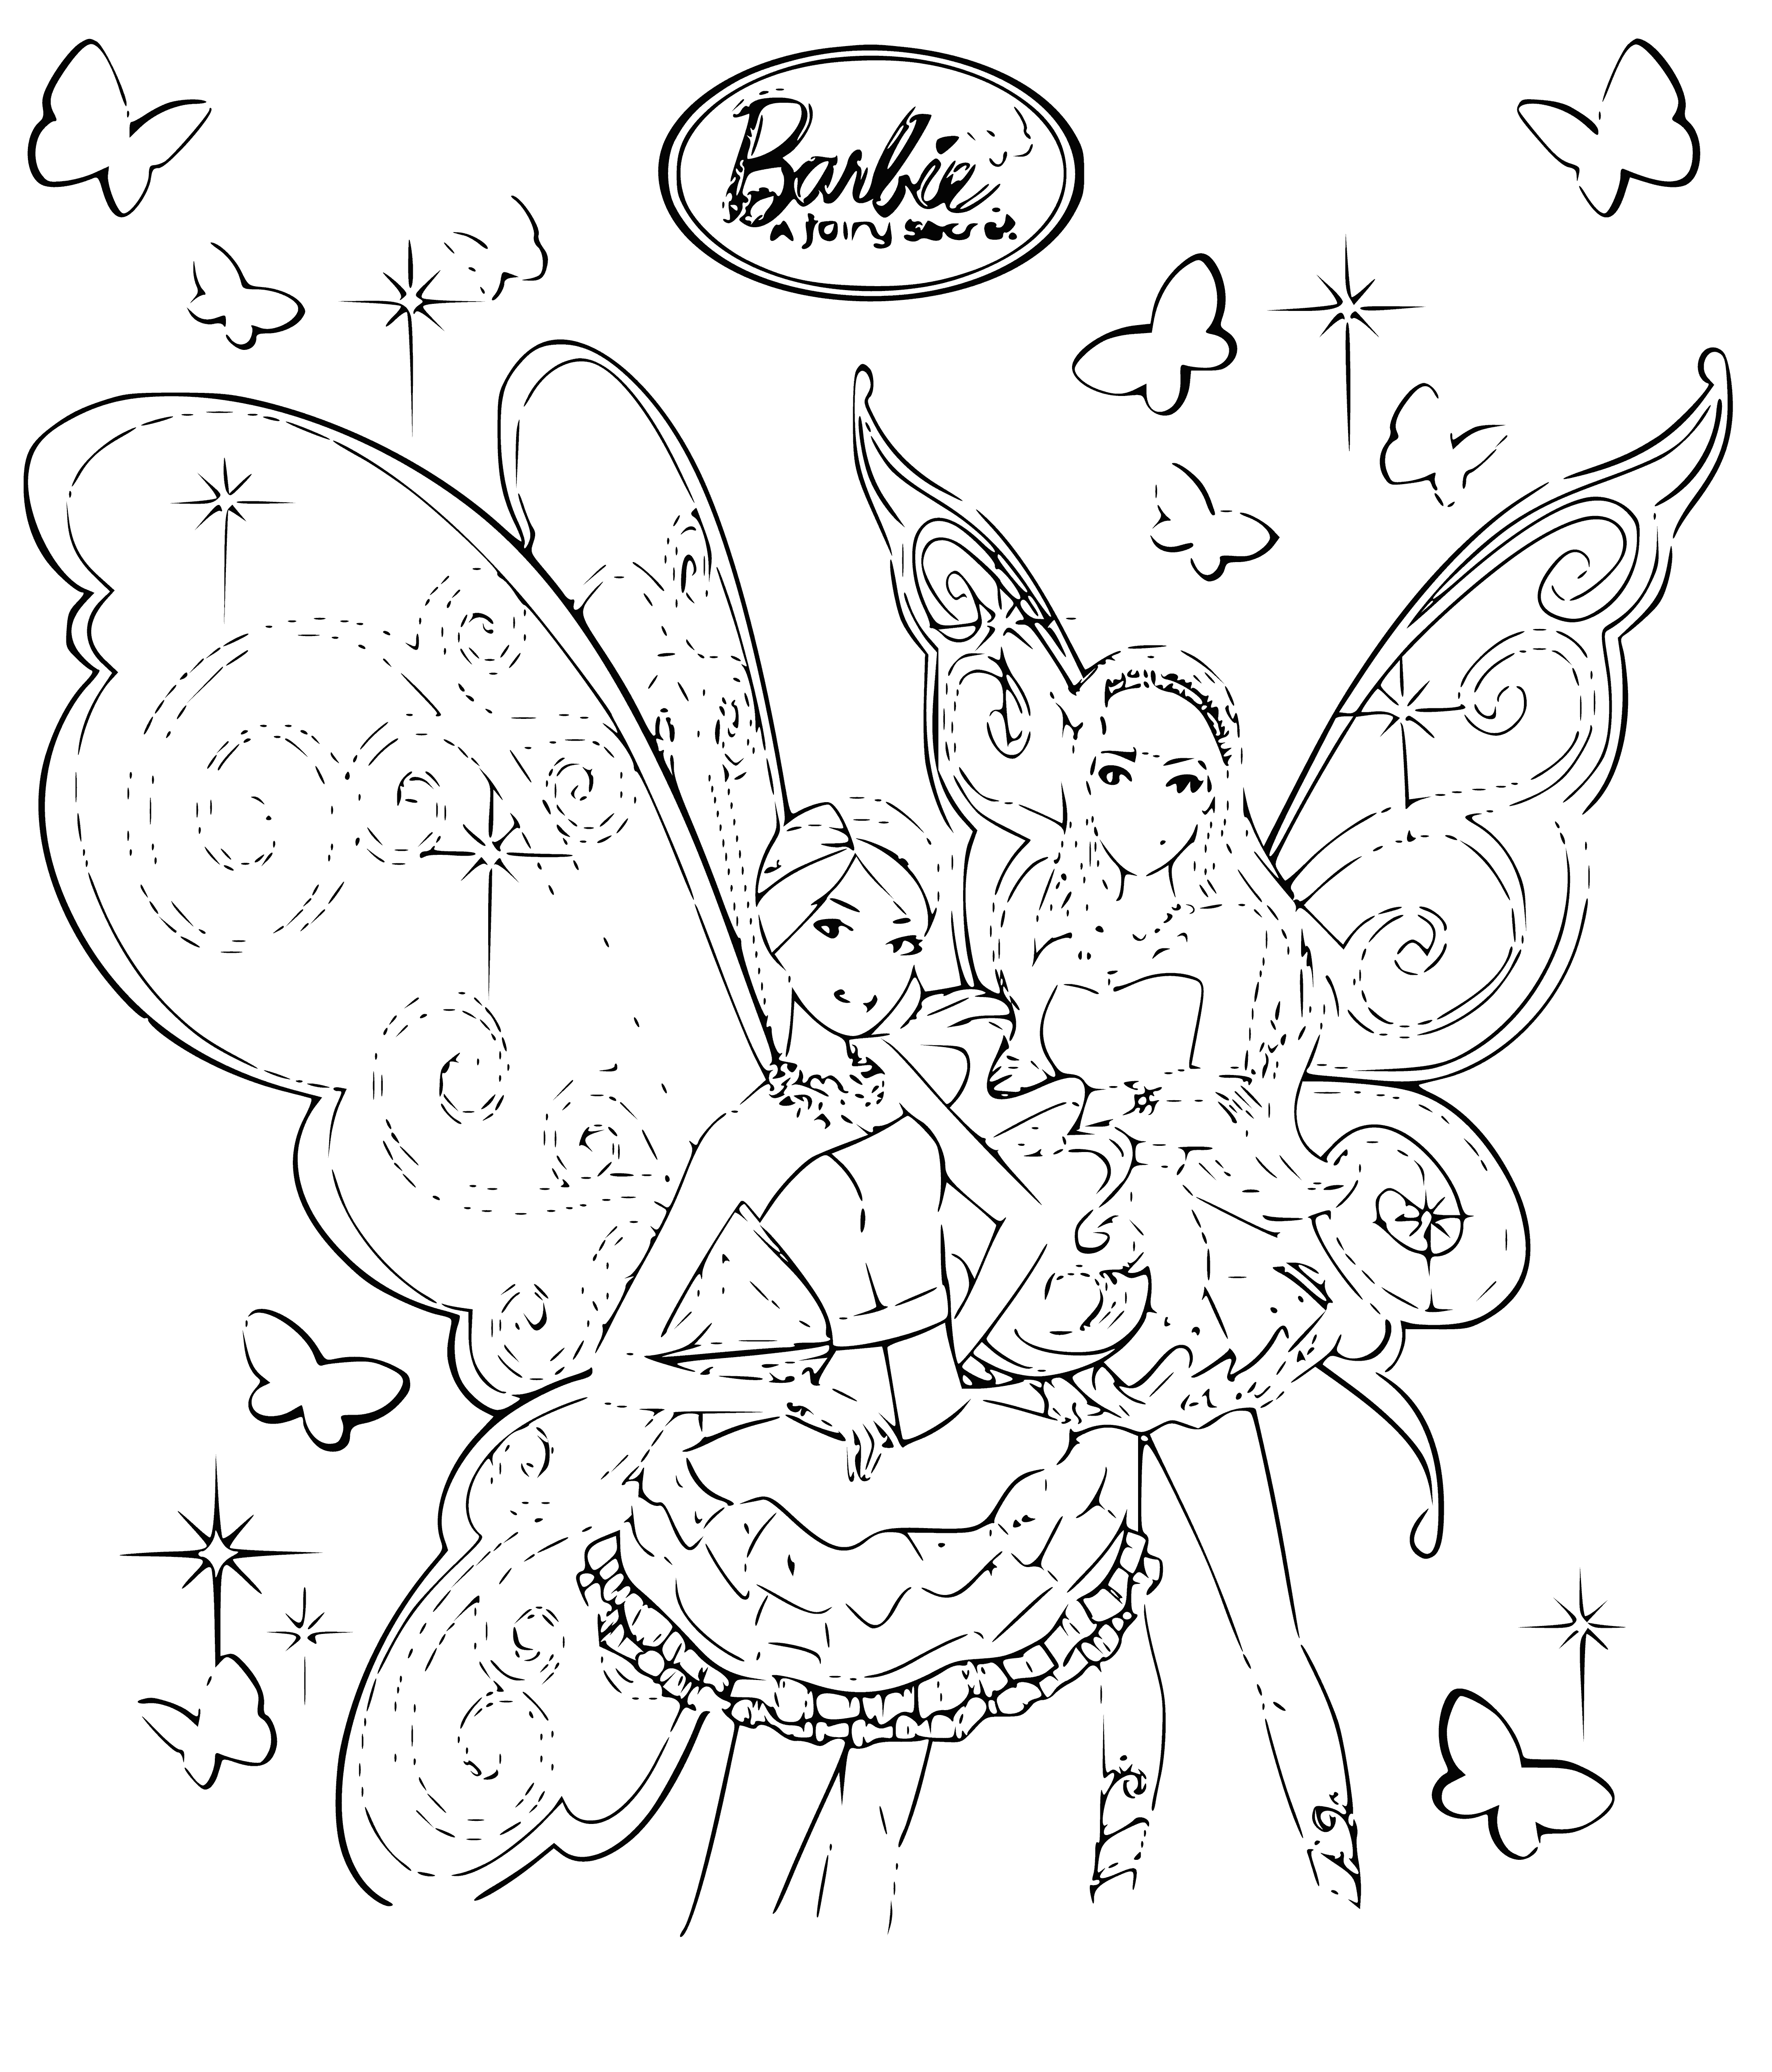 coloring page: Barbie doll dressed as fairy in light pink dress; wearing pink tiara w/ wand & wings w/ darker pink designs.